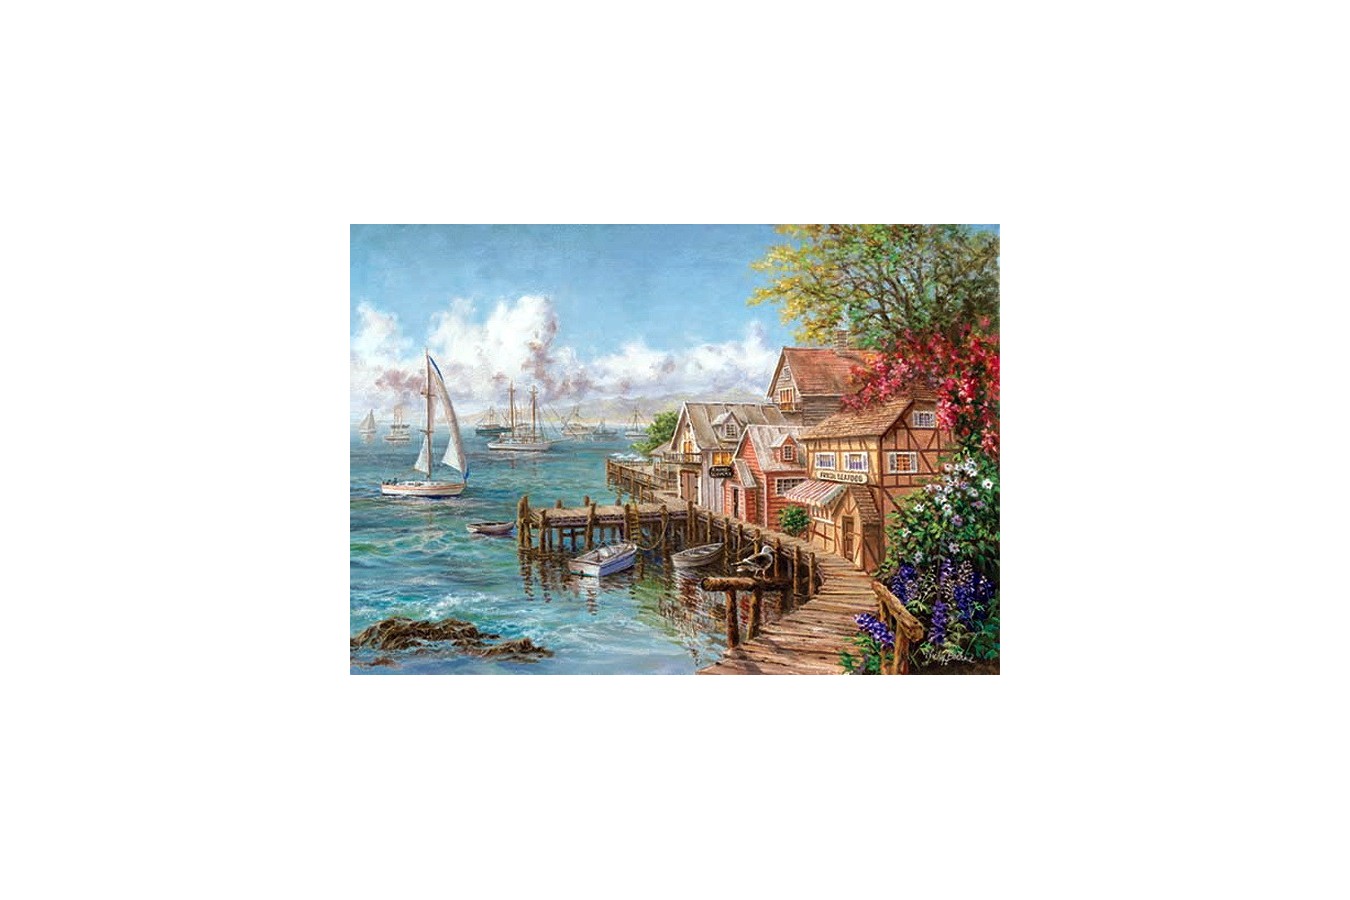 Puzzle Anatolian - Mariner's Haven, 260 piese (3300)